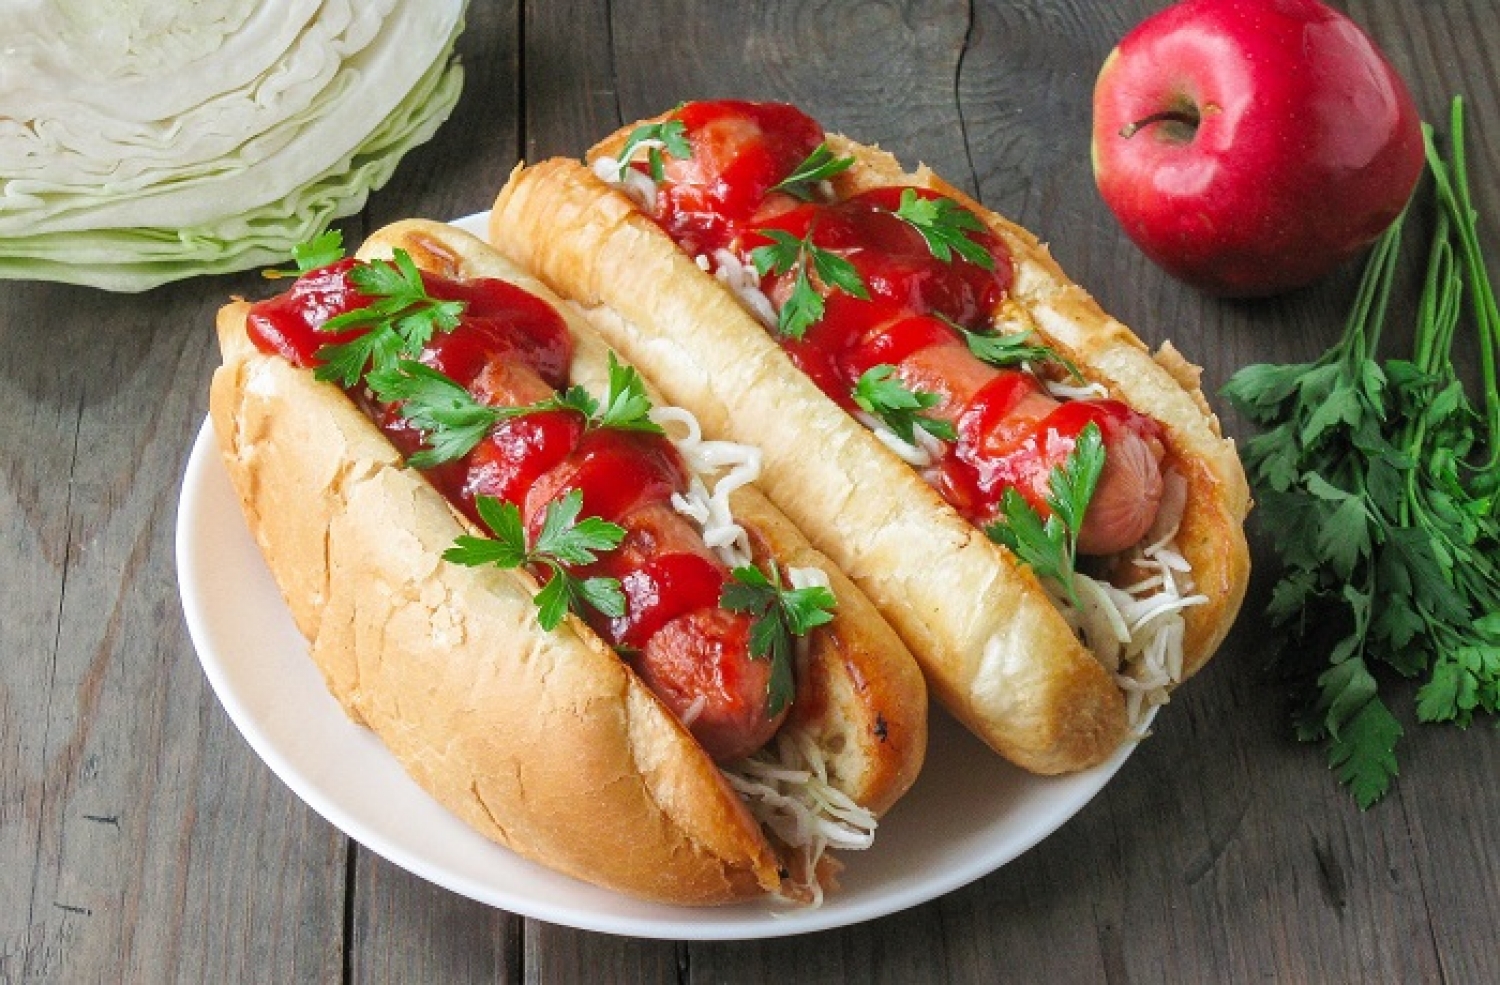 Hot Dogs with a Special Topping